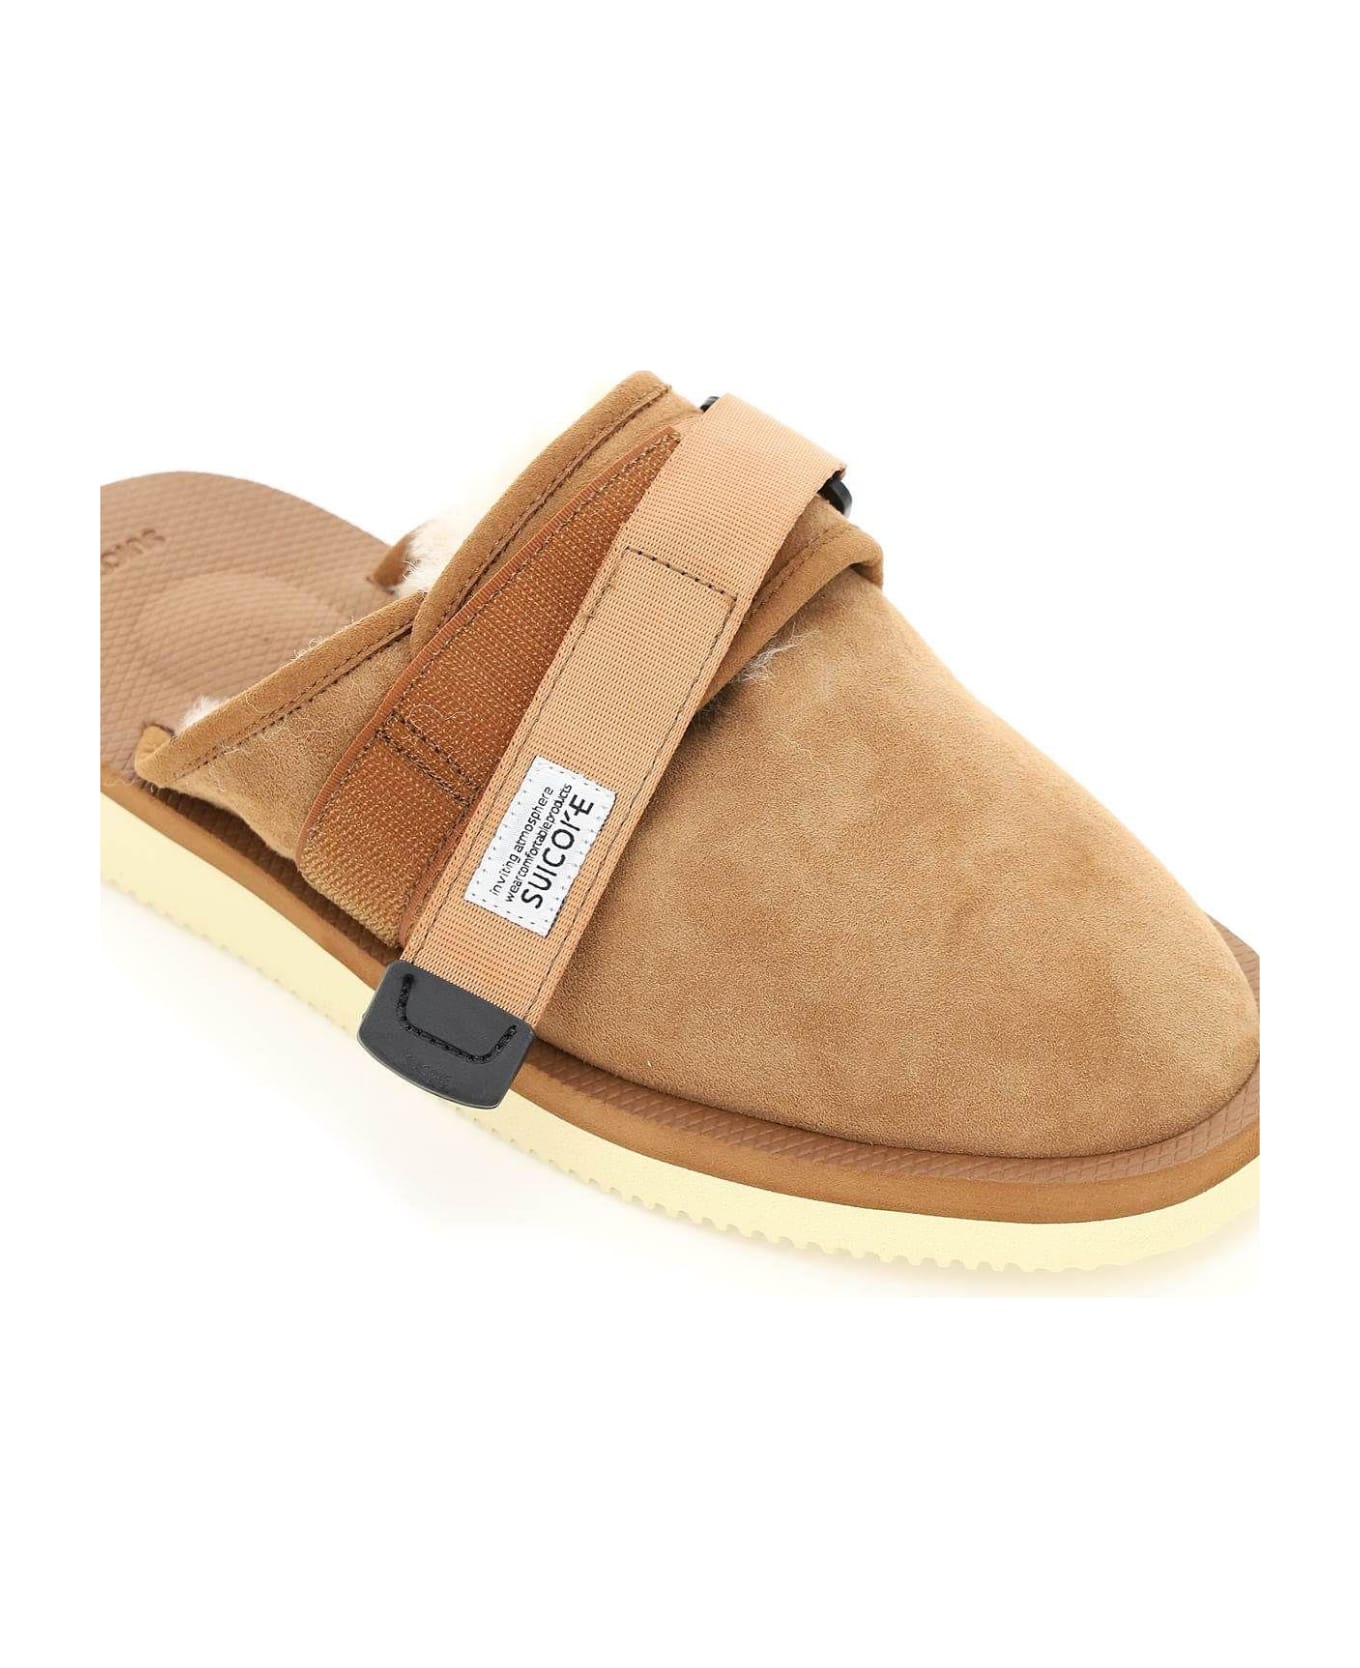 SUICOKE Zavo Suede Sabot With Shearling - BROWN その他各種シューズ